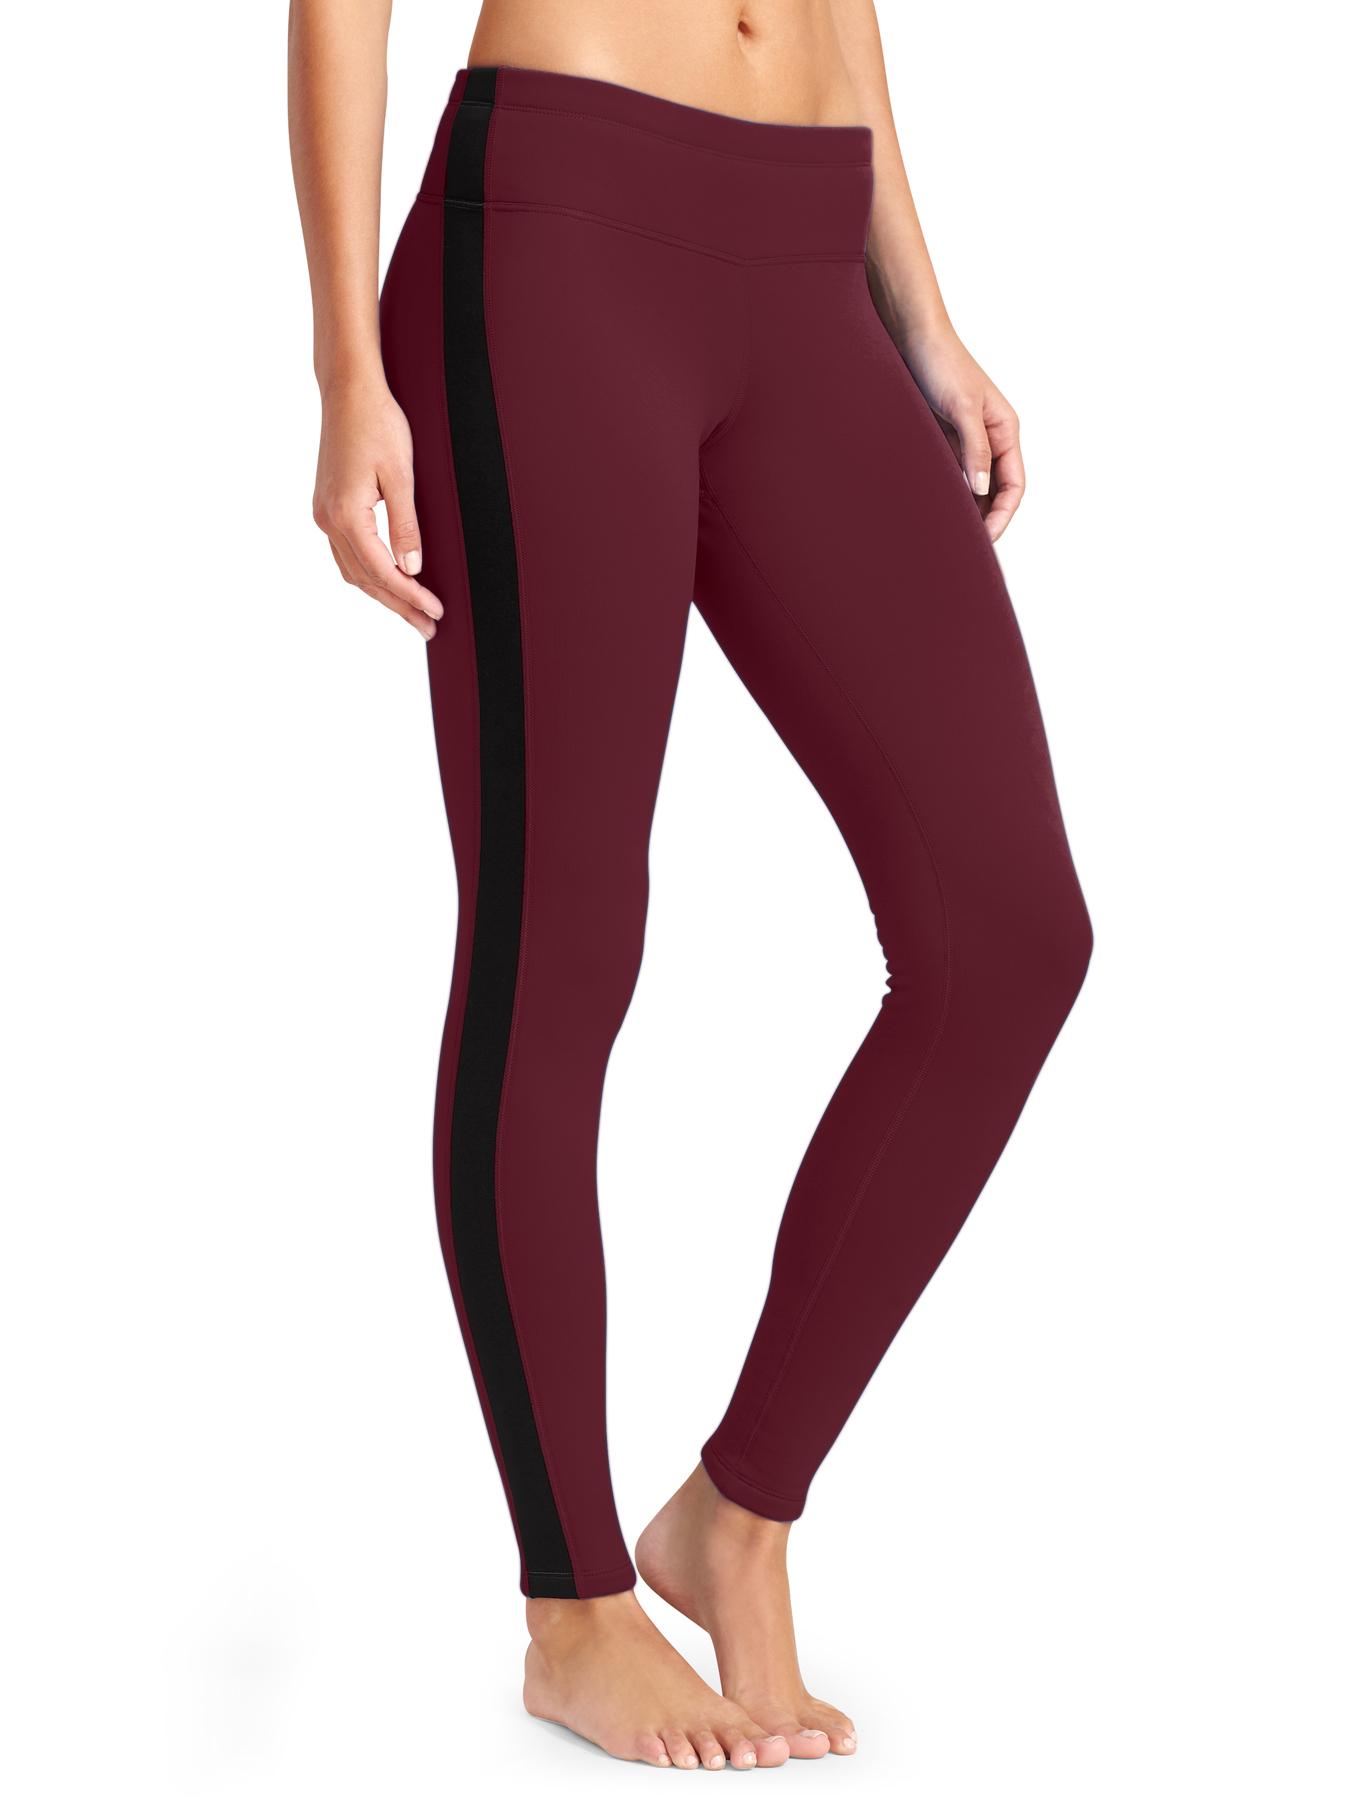 Athleta Lined Snow Pants for Women